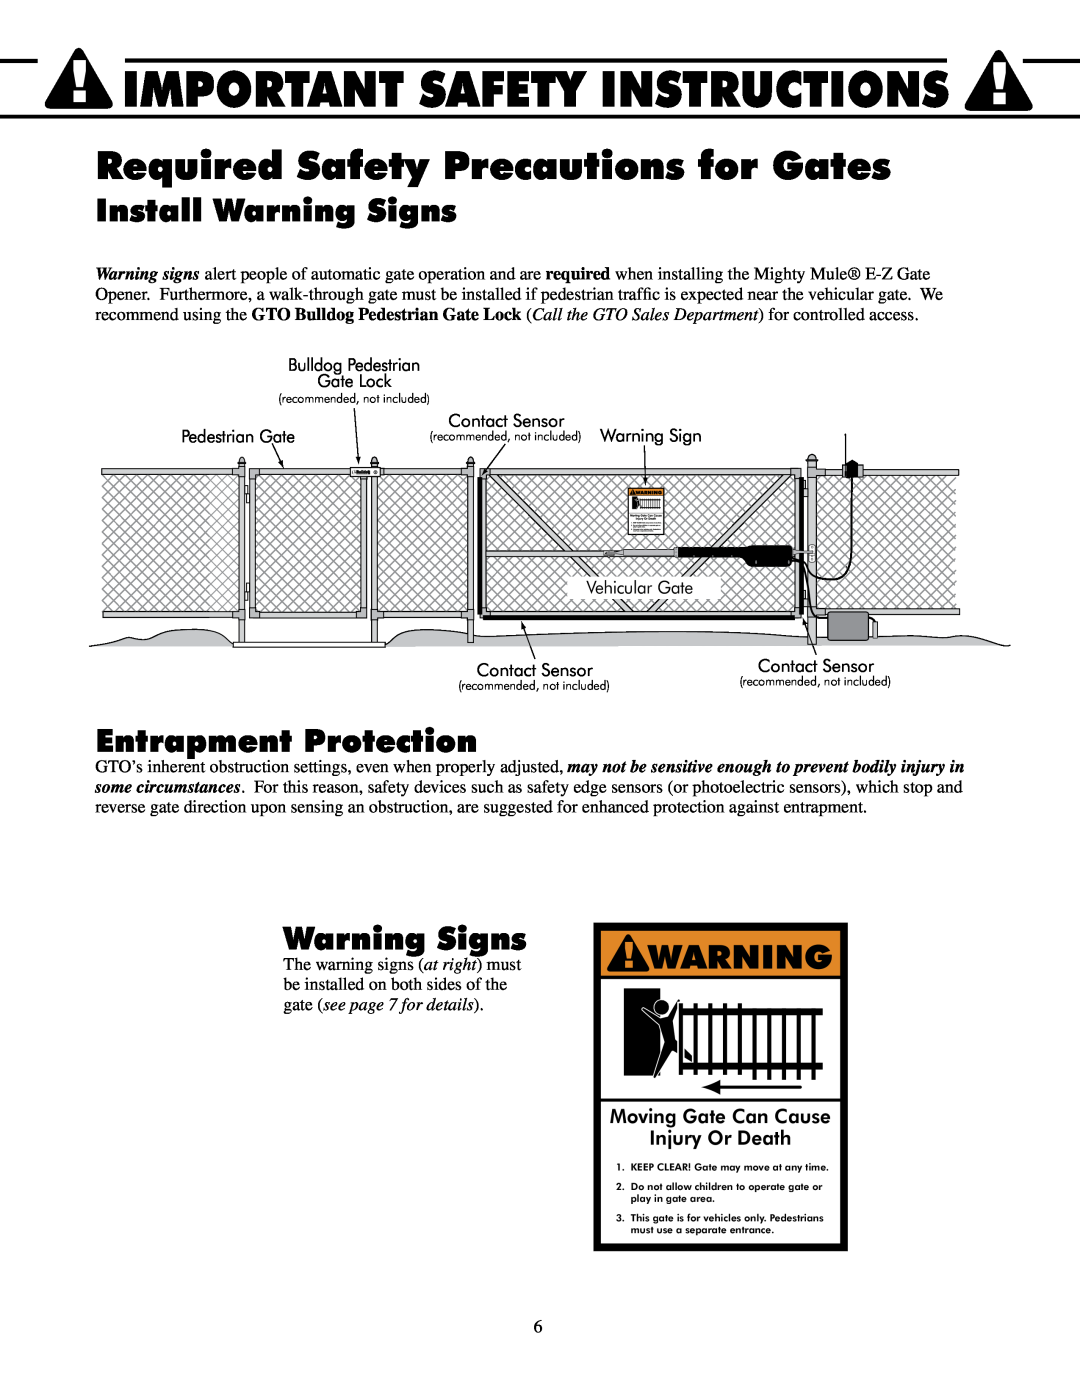 GTO UL325 SERIES installation manual Required Safety Precautions for Gates, Install Warning Signs, Entrapment Protection 